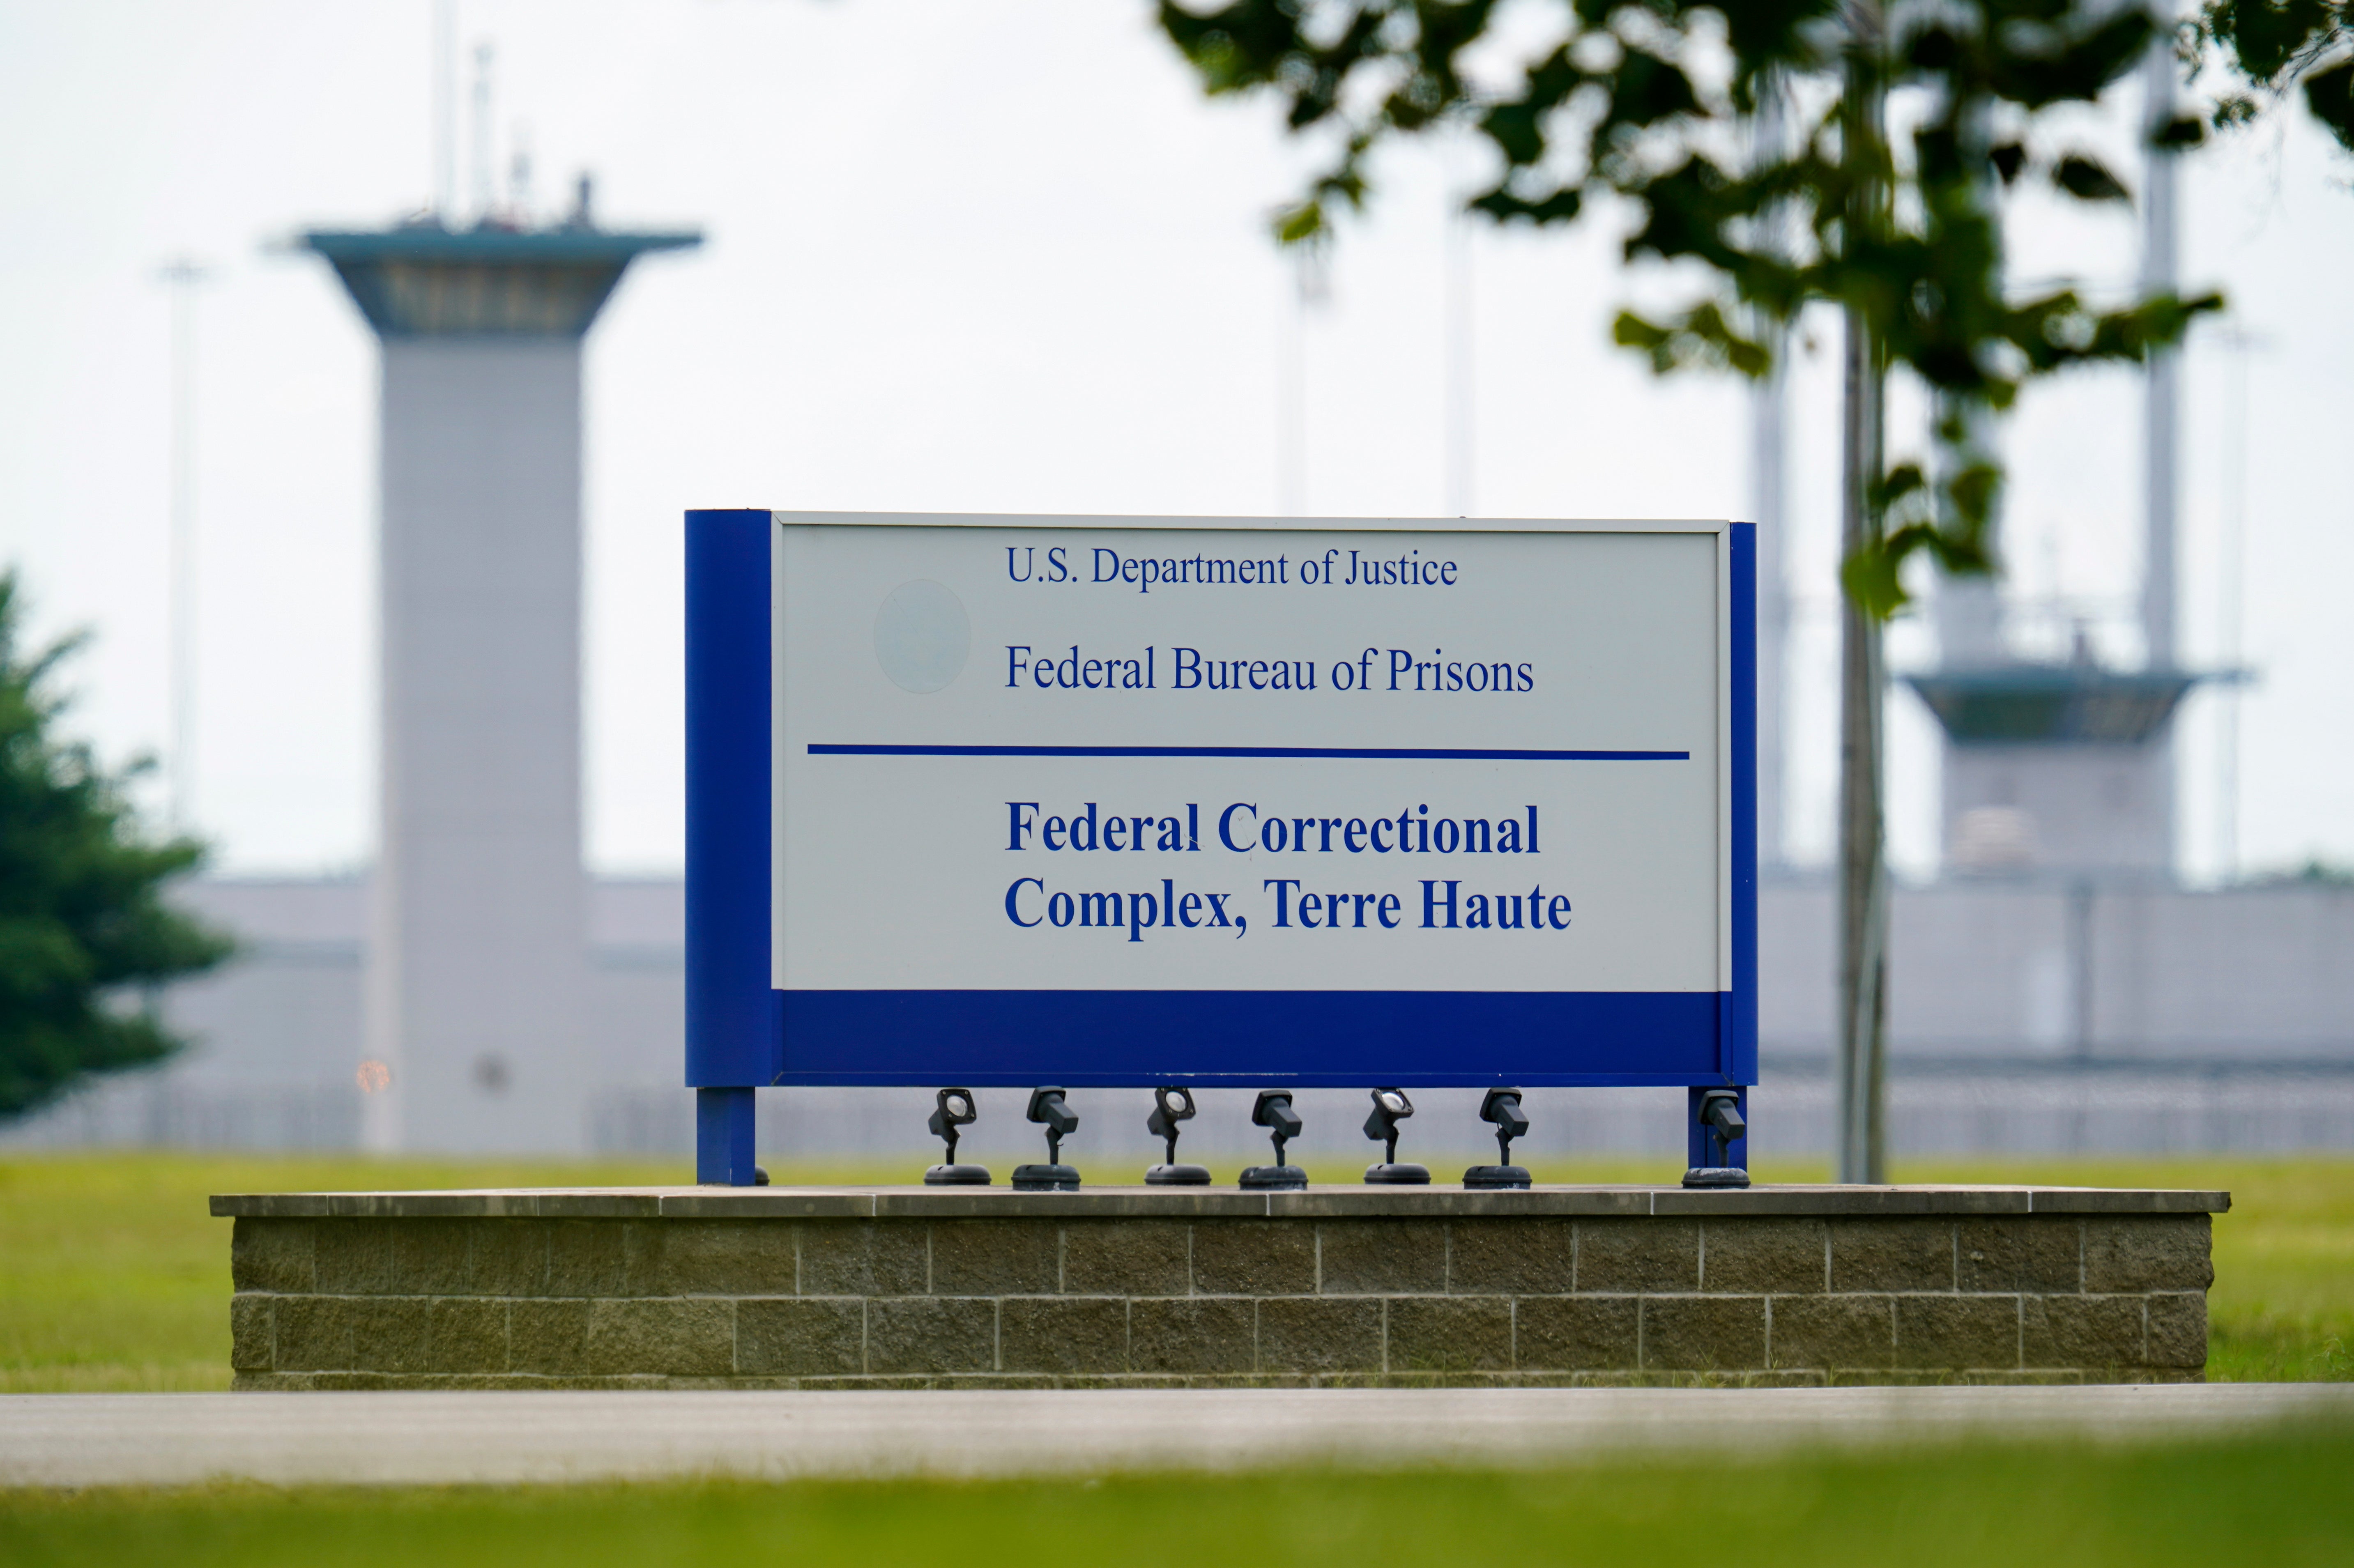 Prisons, even ones that have approved gender-affirming treatments, often delay access for years